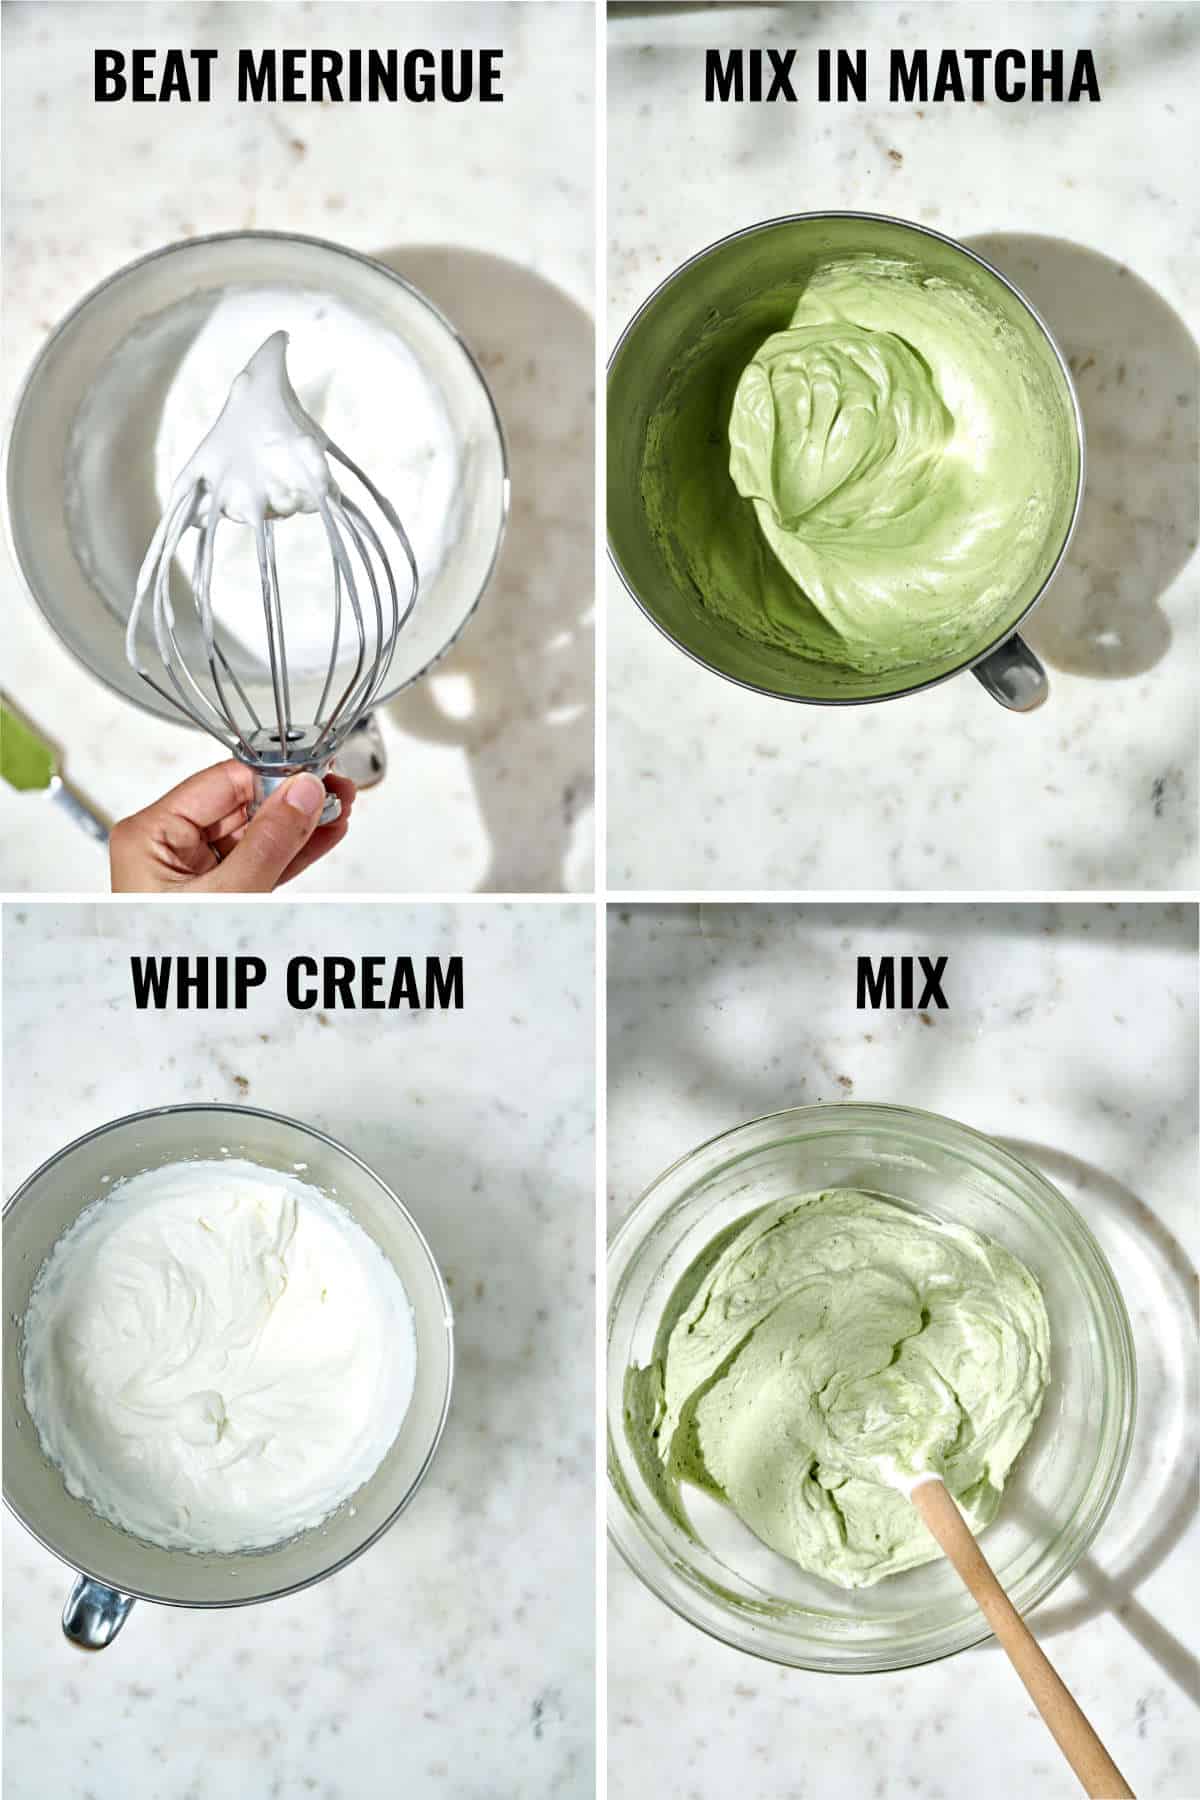 Steps to make matcha mousse with textures of meringue and whipped cream.